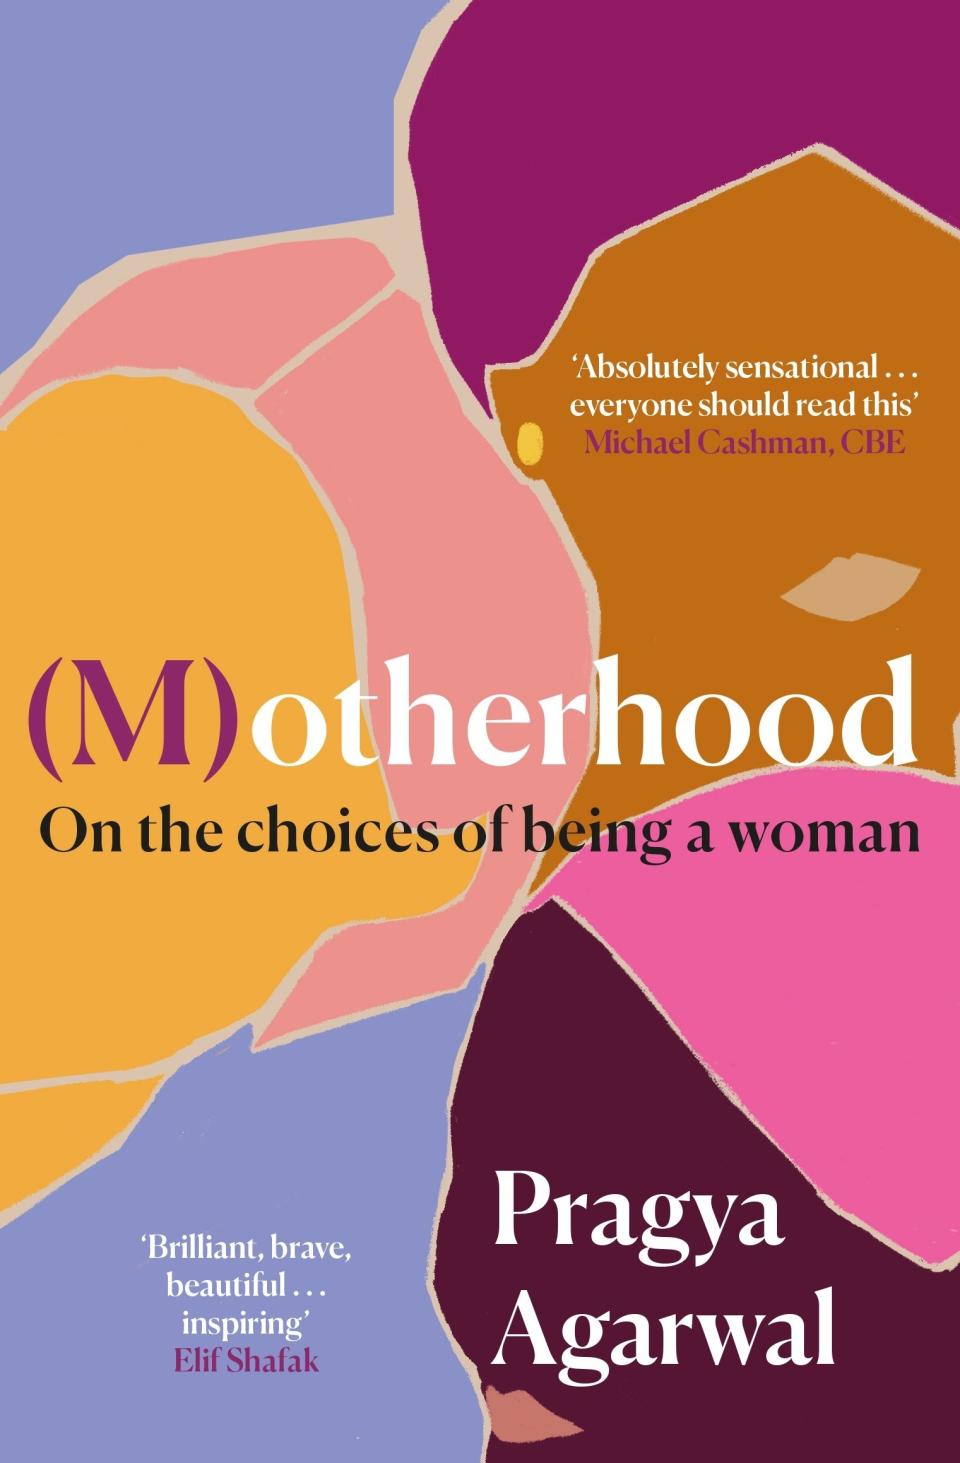 What it's about: A blend of memoir and meticulous research, behavioral scientist Pragya Agarwal examines motherhood from many different perspectives, including her own experience as a woman of South Asian heritage living in Britain. Raw and honest, (M)otherhood is a thought-provoking exploration of reproductive choices and society's obsession with women’s bodies.  Get it from Amazon.